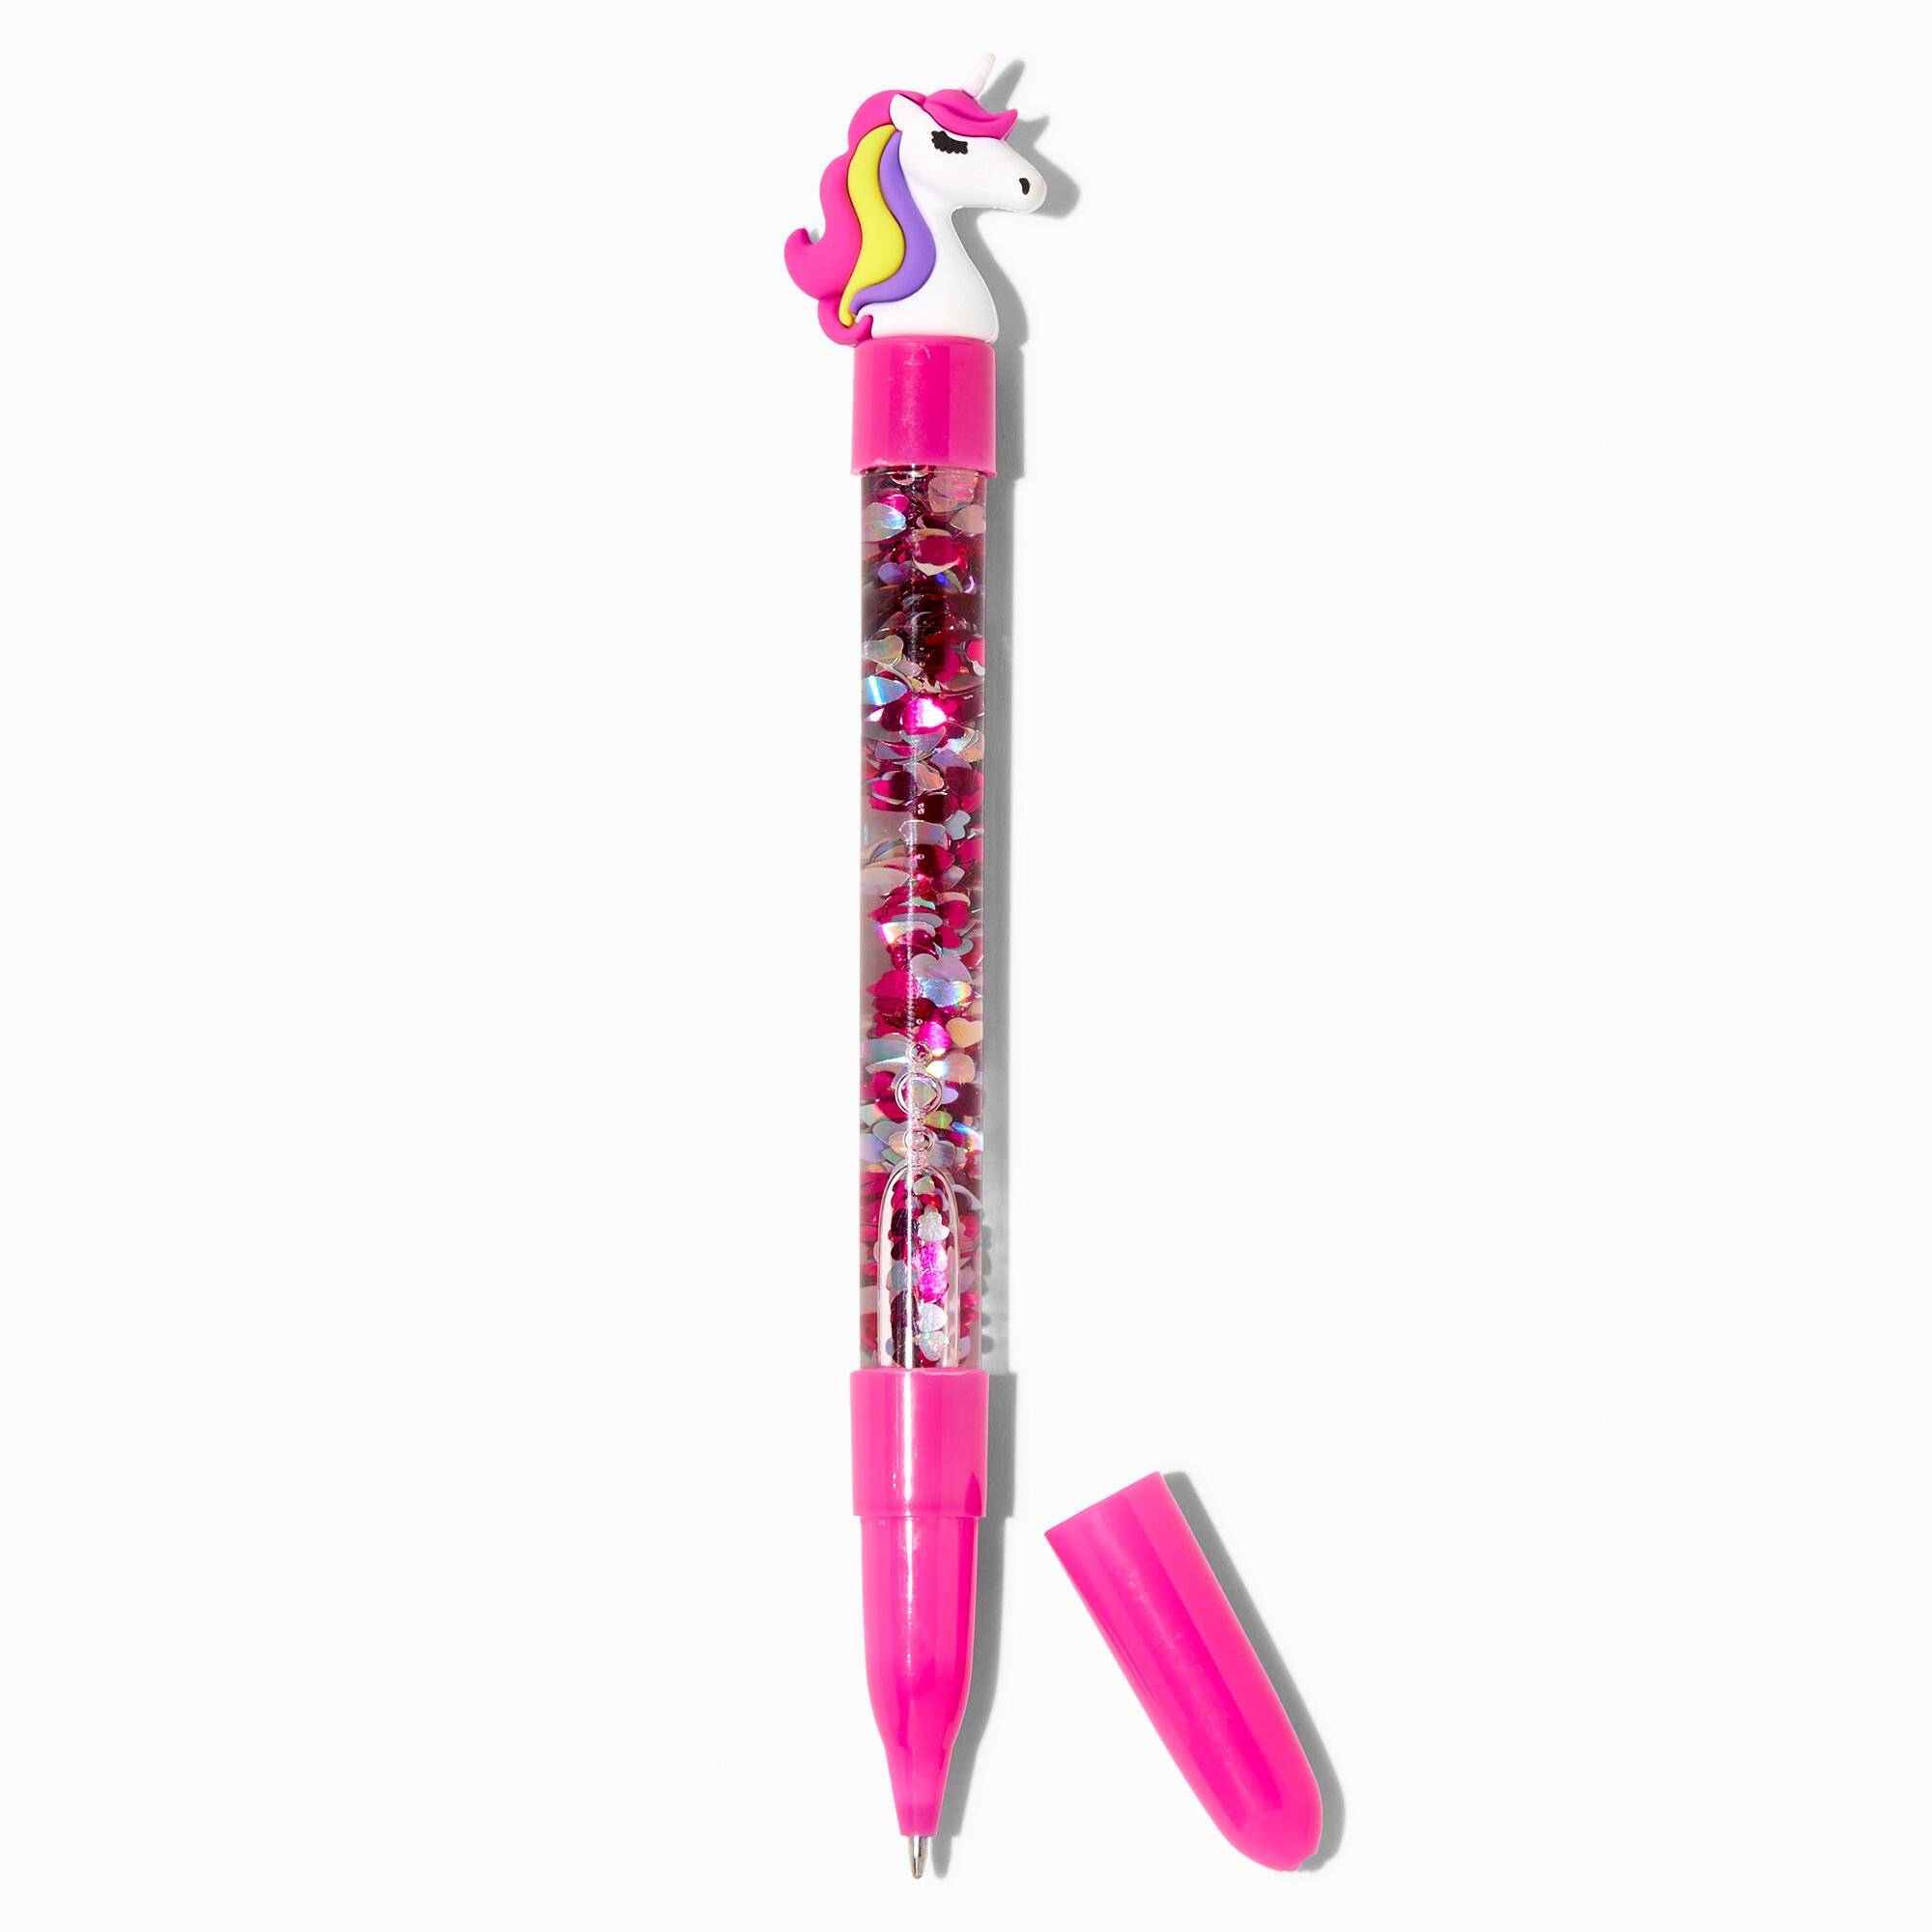 View Claires Unicorn WaterFilled Heart Glitter Pen Pink information